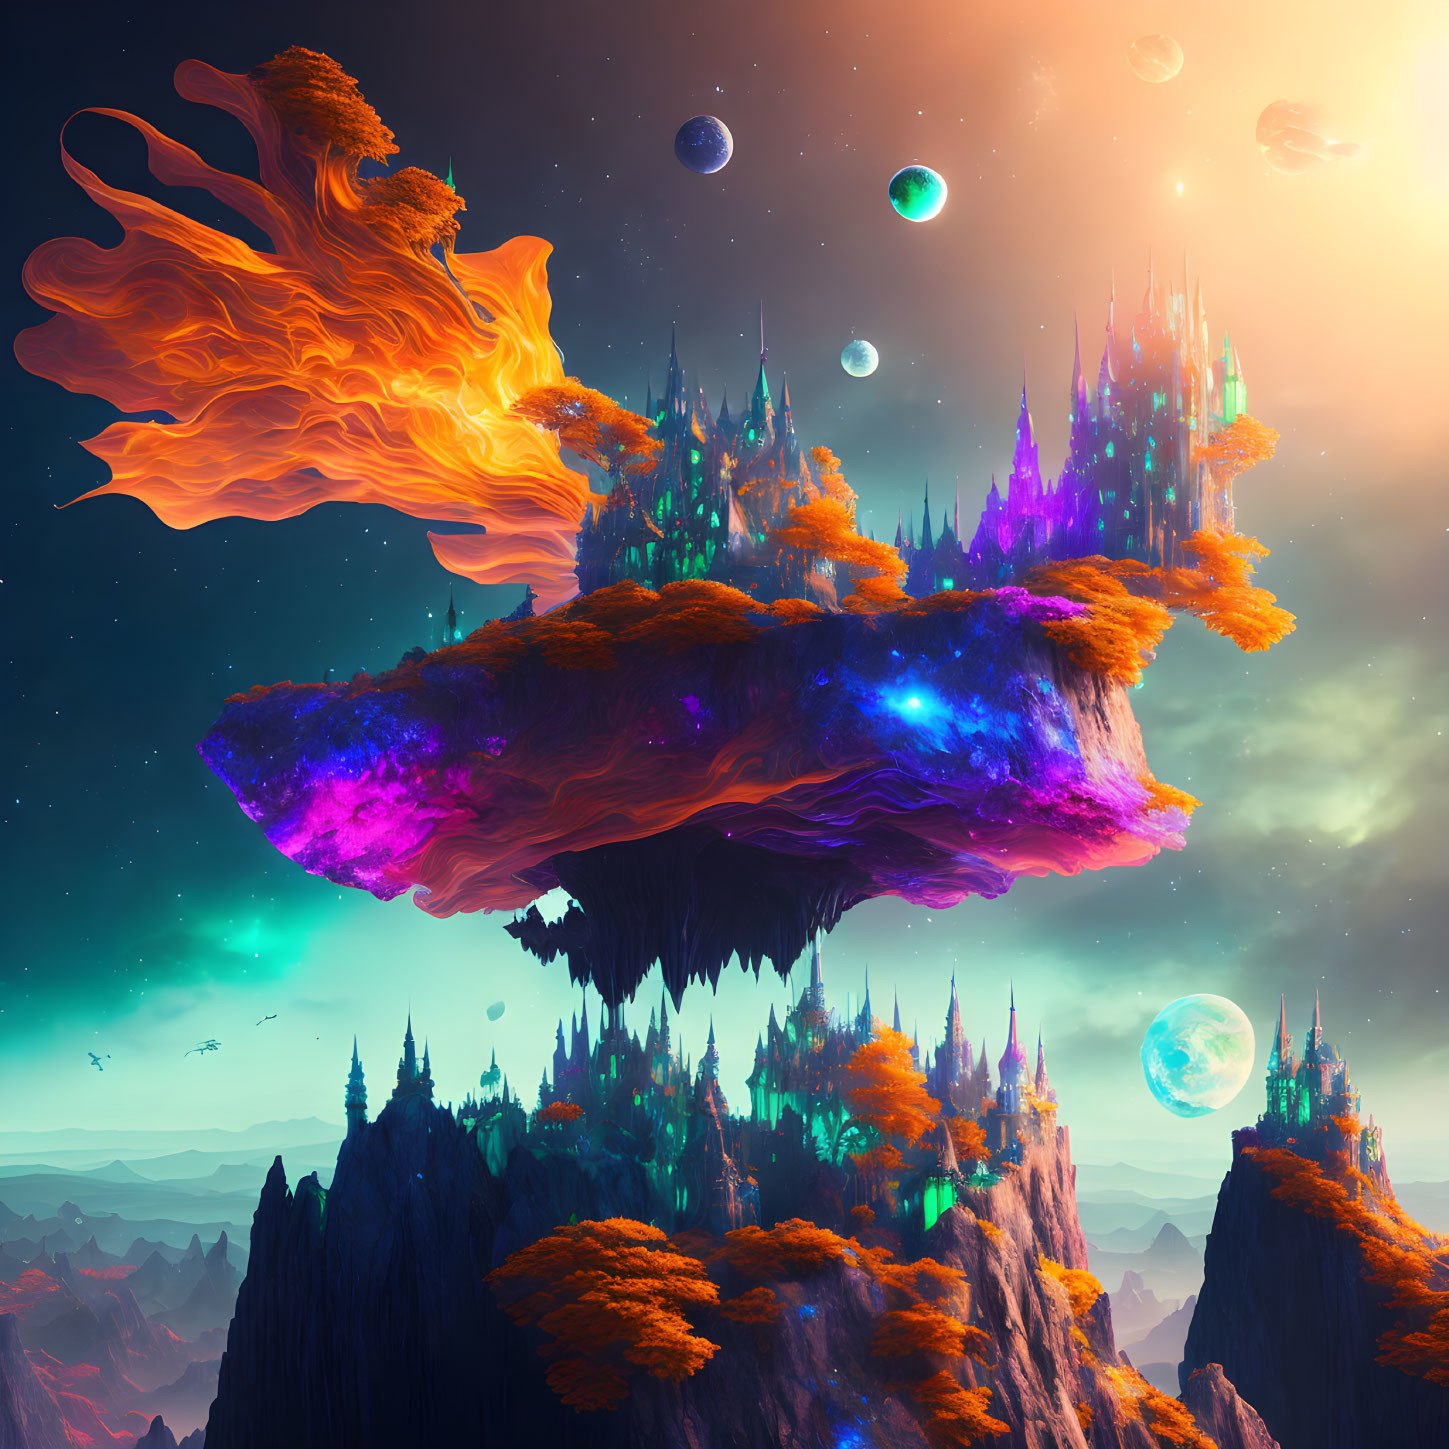 Vibrant orange and purple floating island with celestial spires